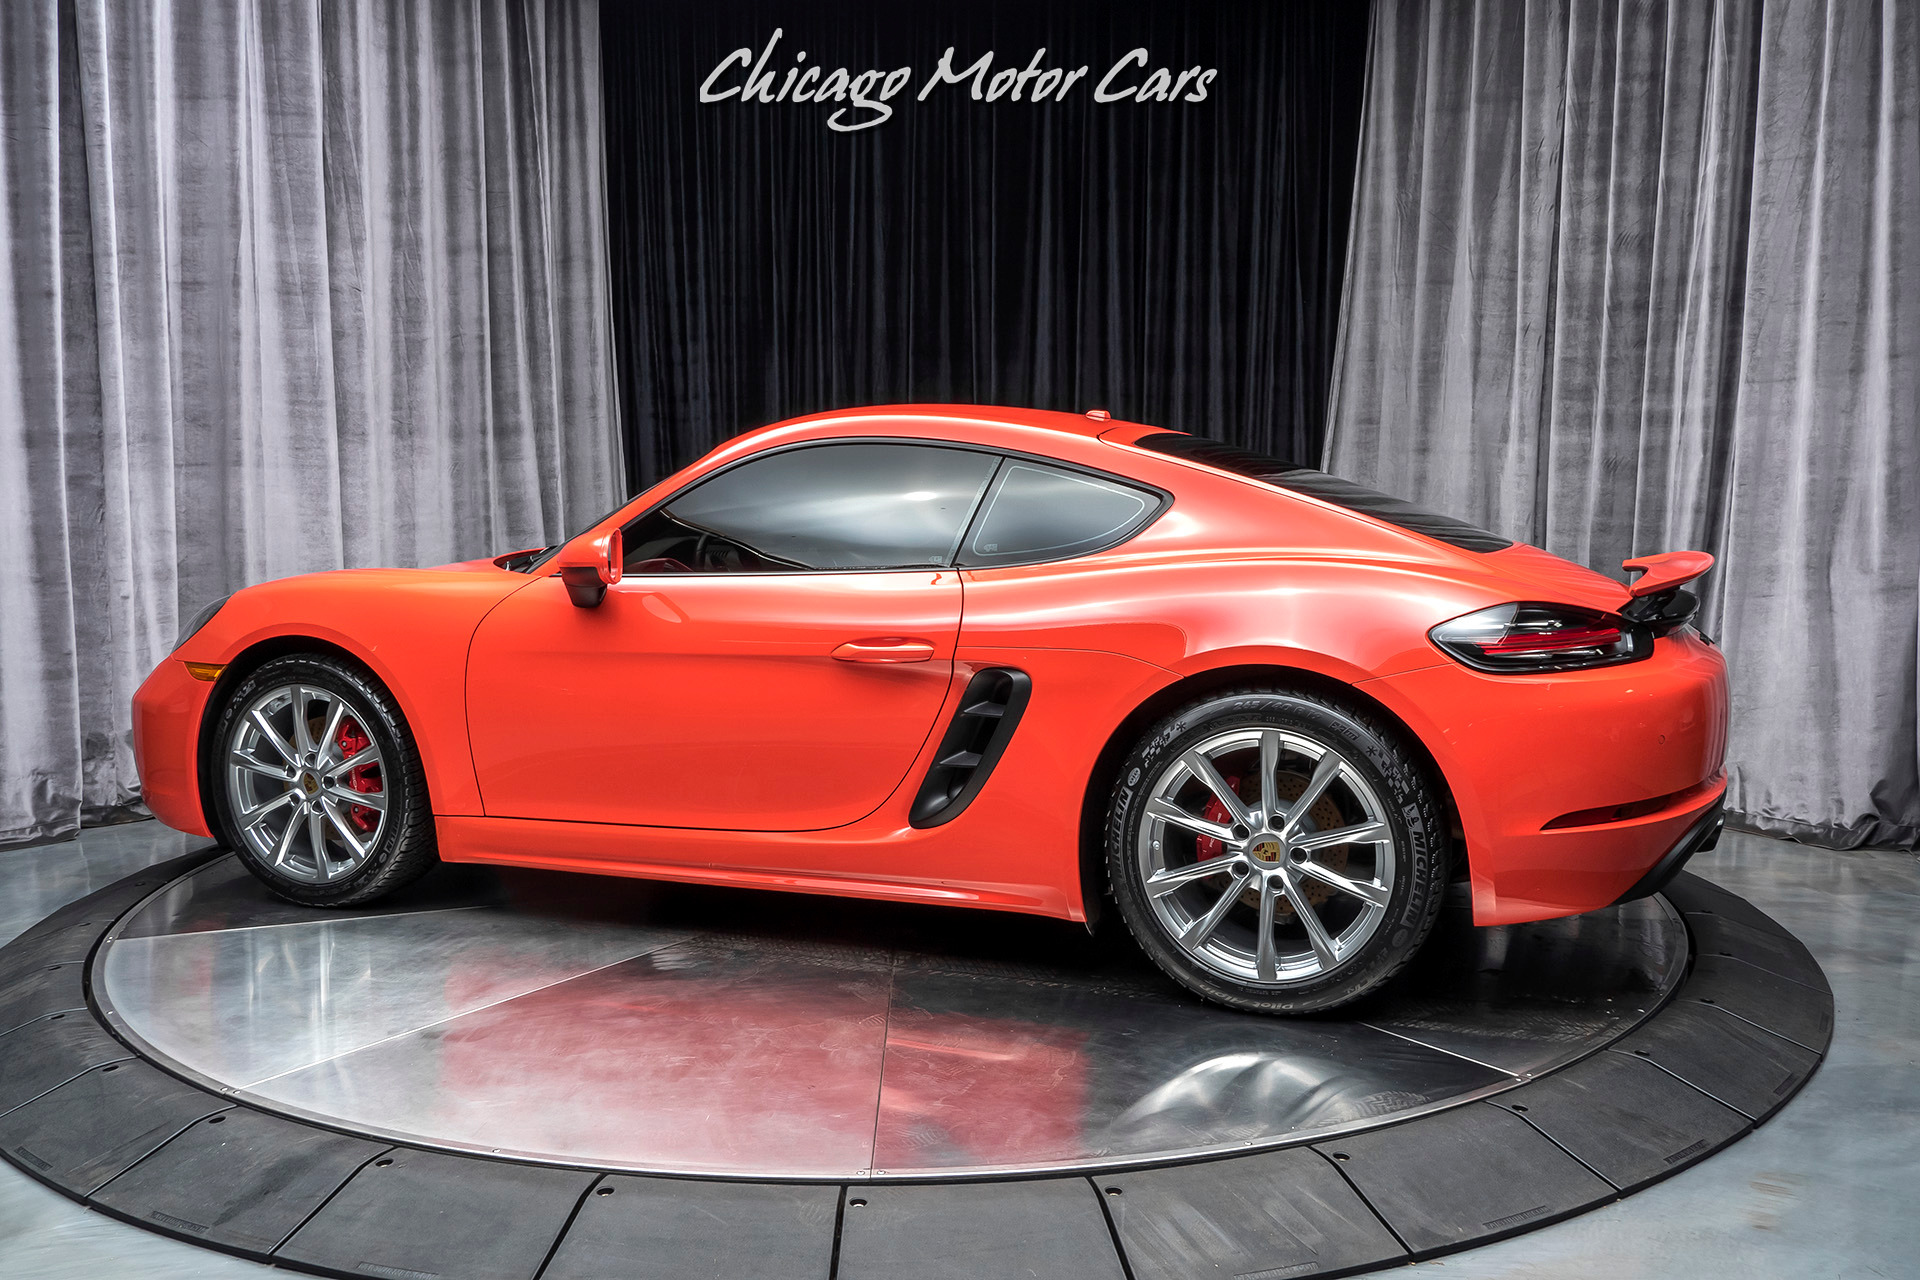 Used-2018-Porsche-718-Cayman-S-Coupe-MSRP-81K-6-SPEED-MANUAL-ONLY-2200-MILES